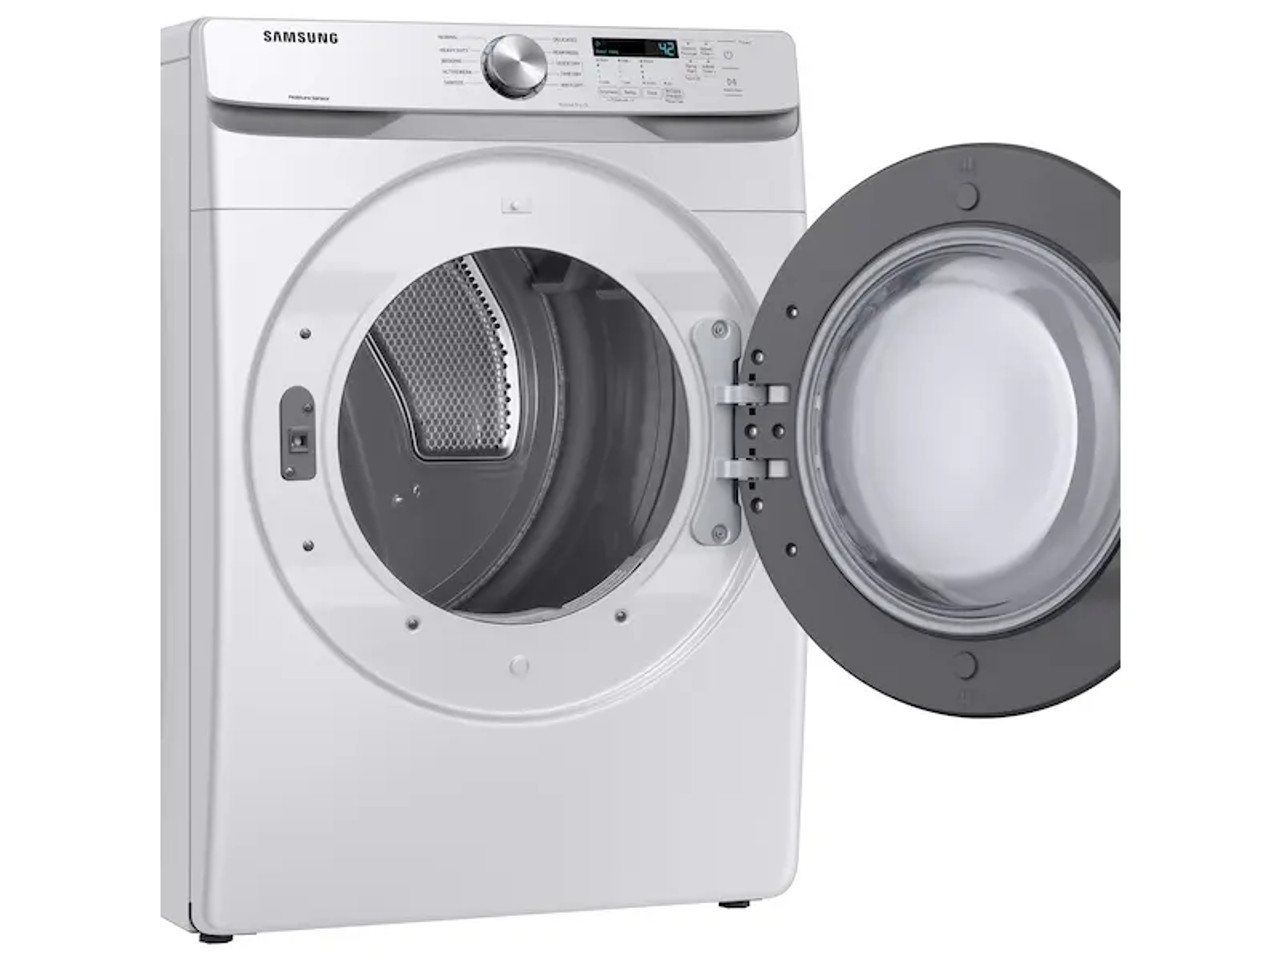 Samsung DVE45T6020W 7.5 cu. ft. Stackable Long Vented Electric Dryer